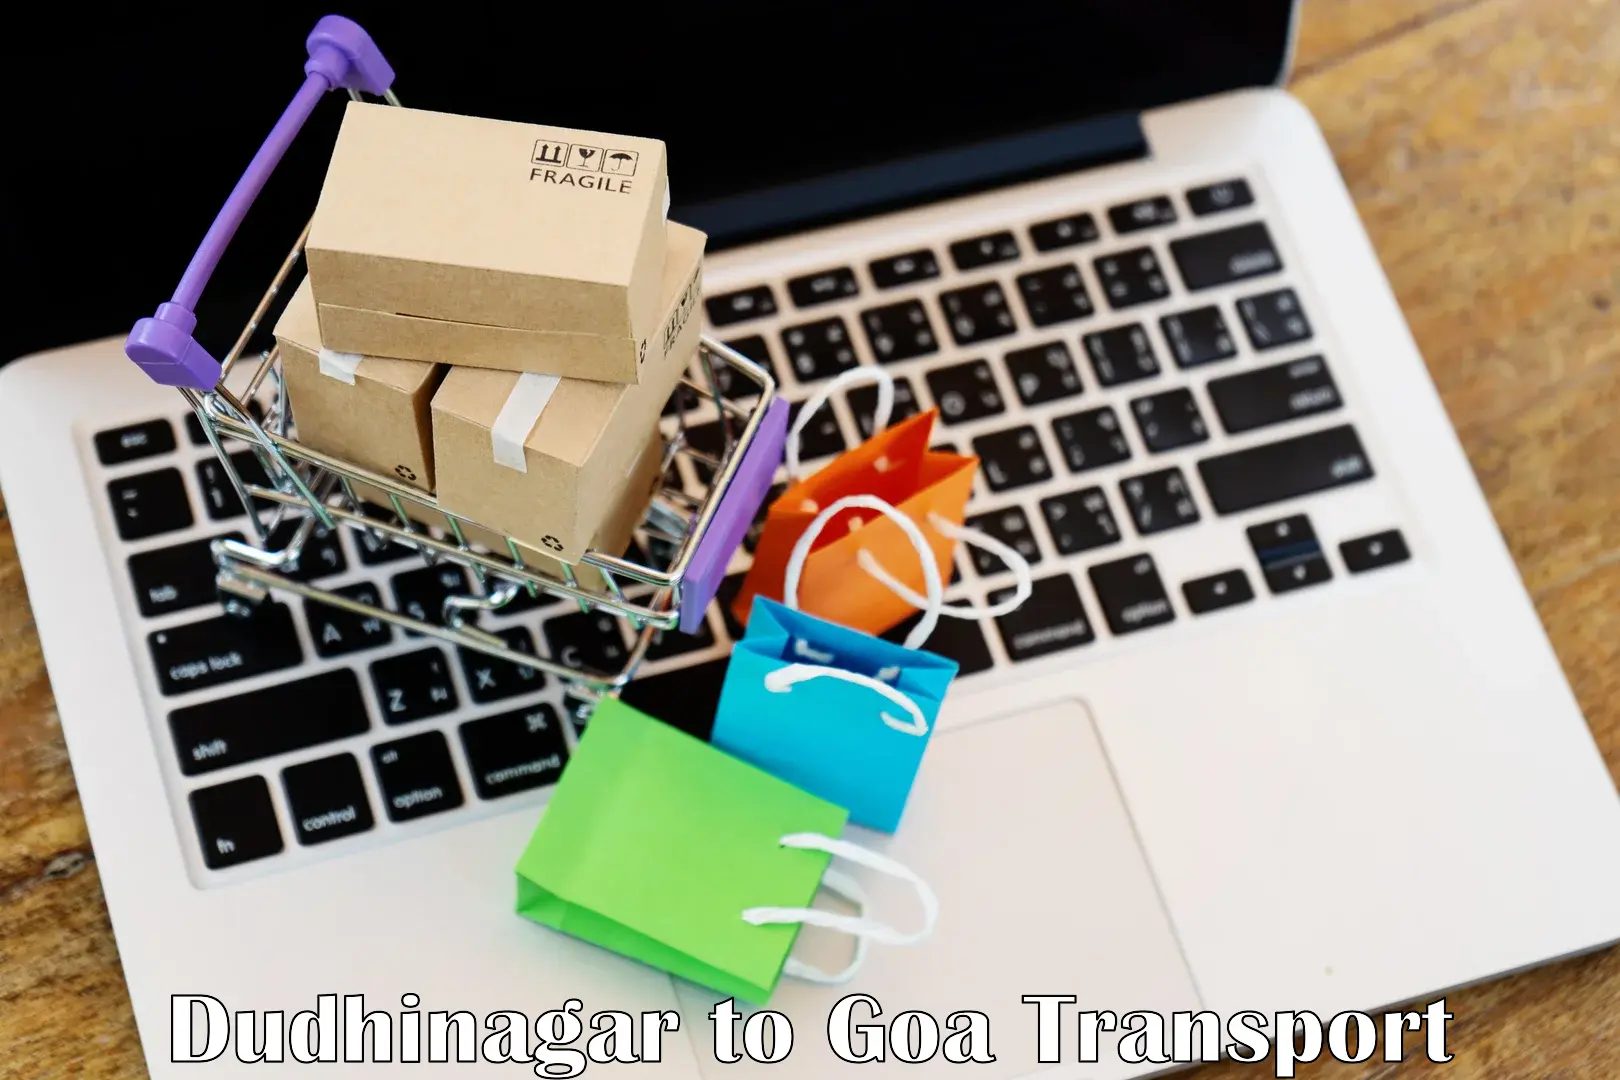 Transport in sharing in Dudhinagar to South Goa